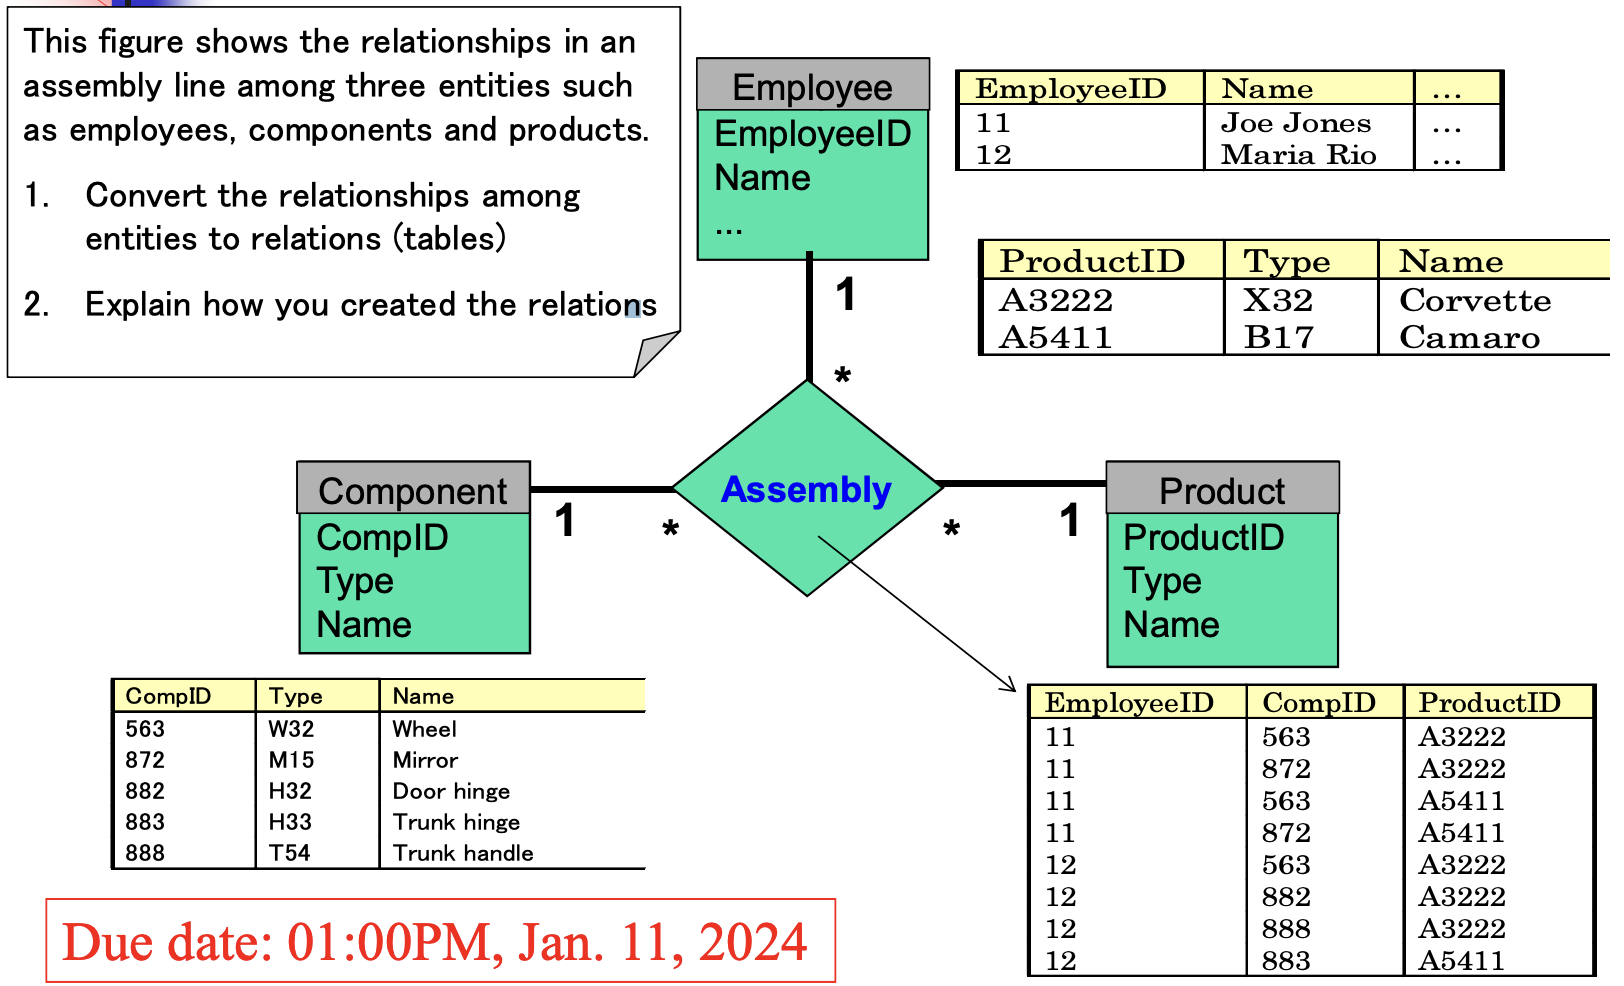 This figure shows the relationships in an assembly line among three entities such as employees, components